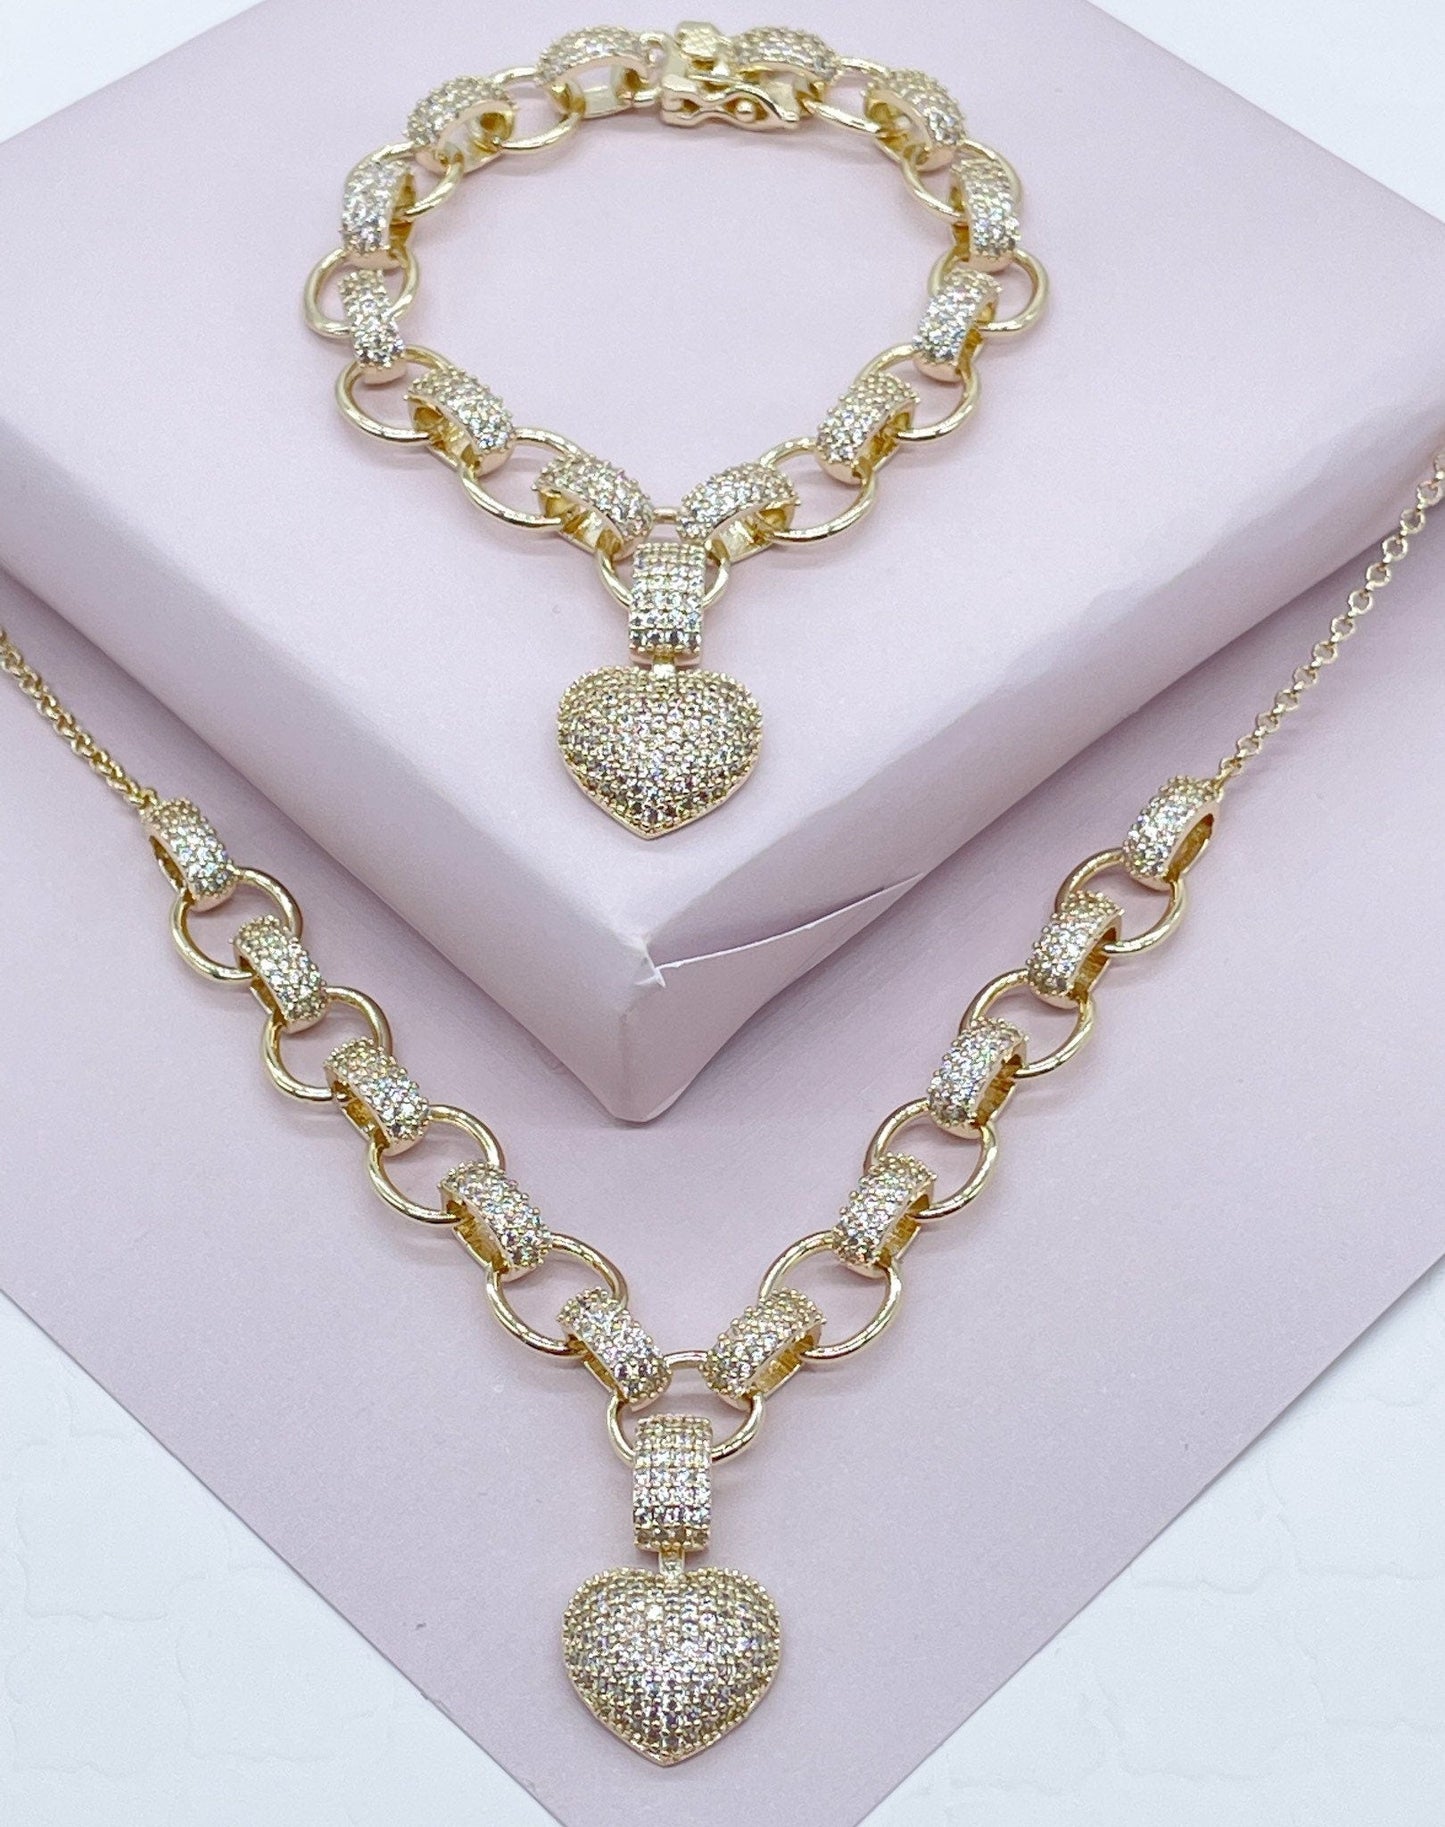 18k Gold Layered Puffy Heart Set of Bracelet Necklace In Micro Pave Cubic